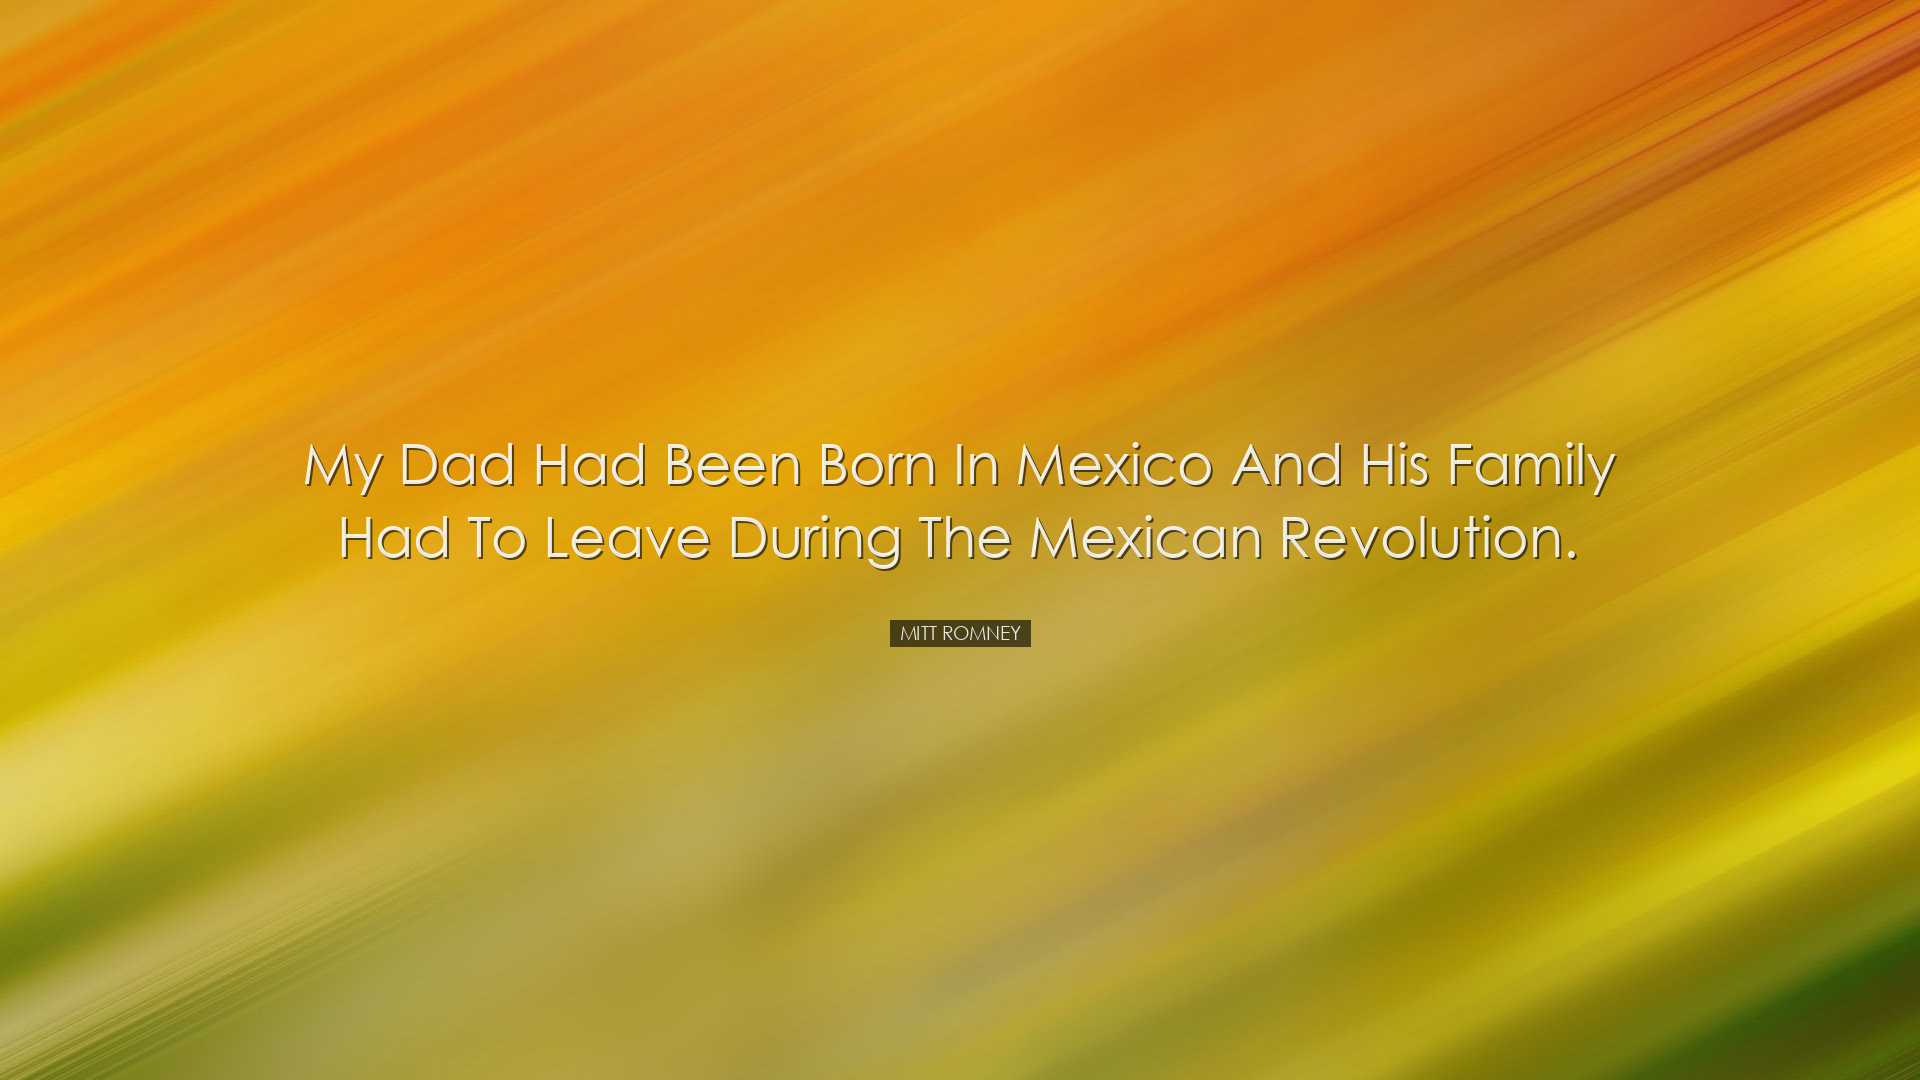 My dad had been born in Mexico and his family had to leave during